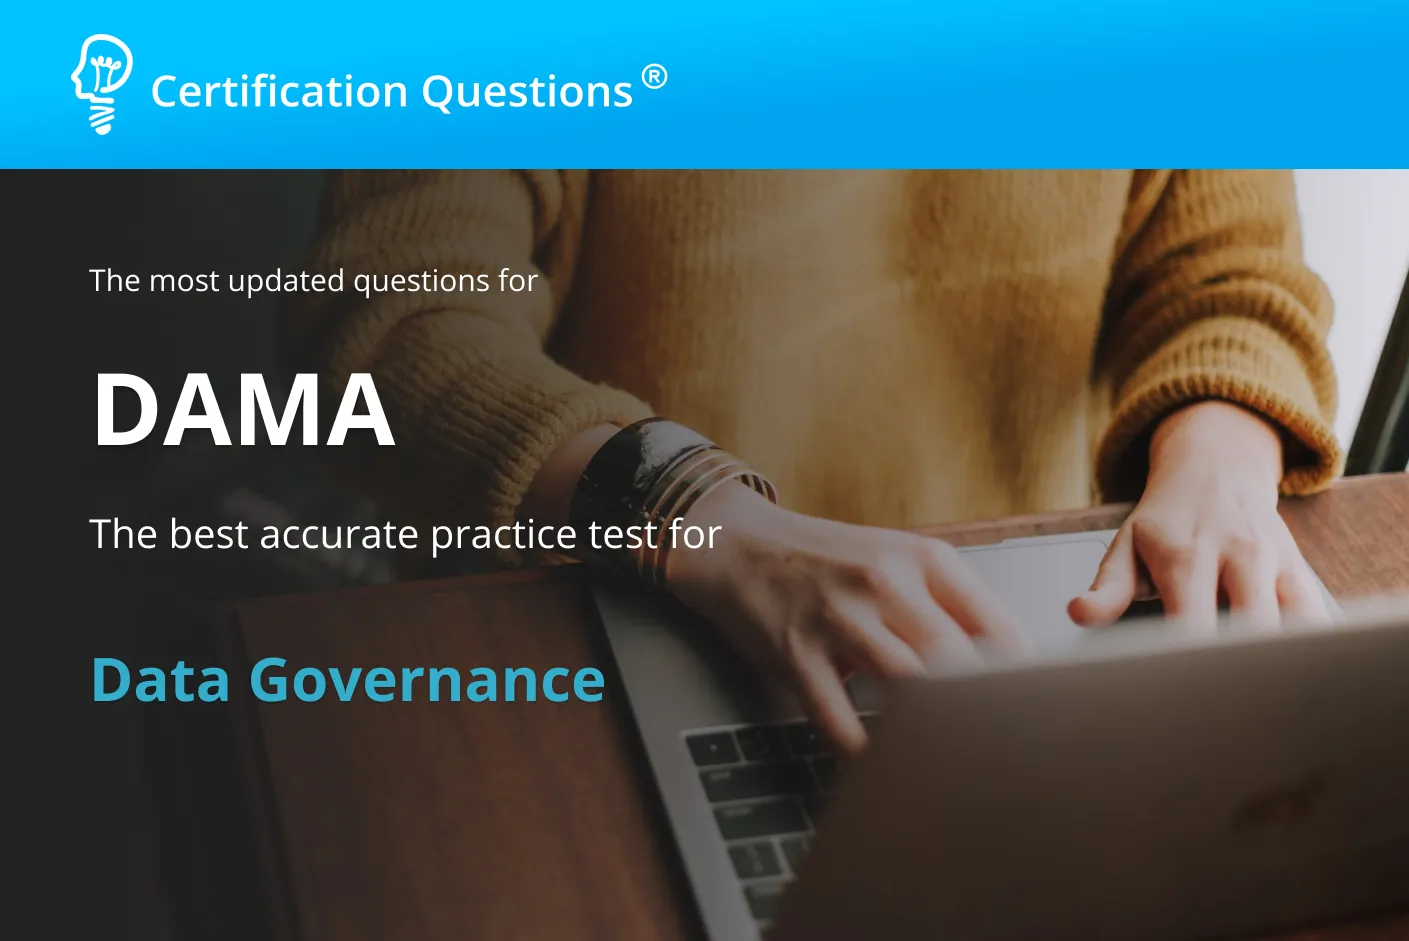 This study guide is related to the data governance practice test in the United States of America